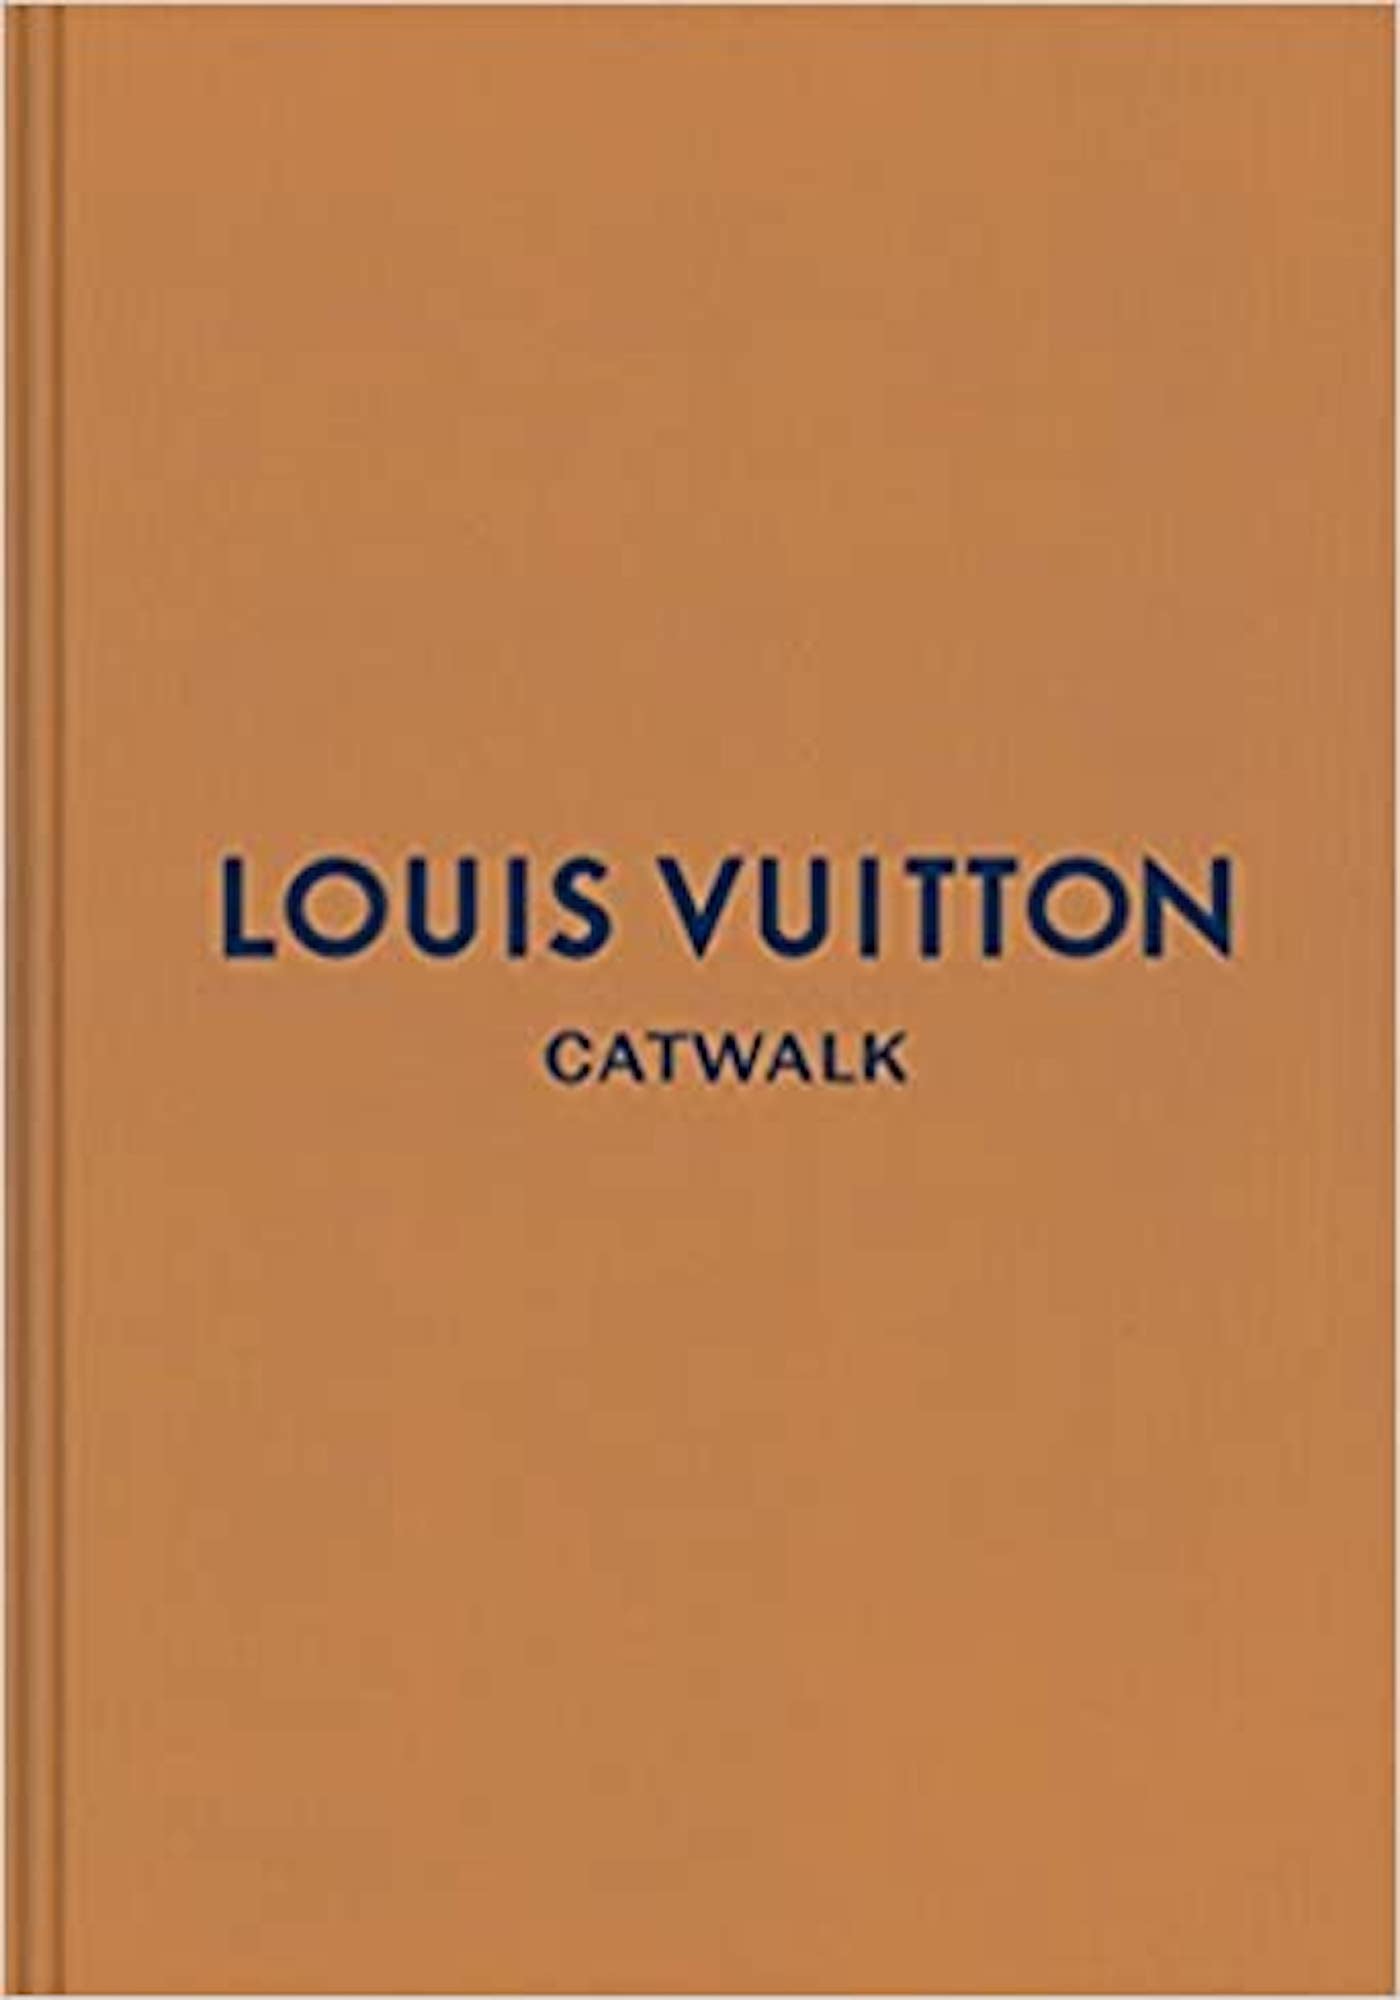 LOUIS VUITTON: THE COMPLETE FASHION COLLECTIONS